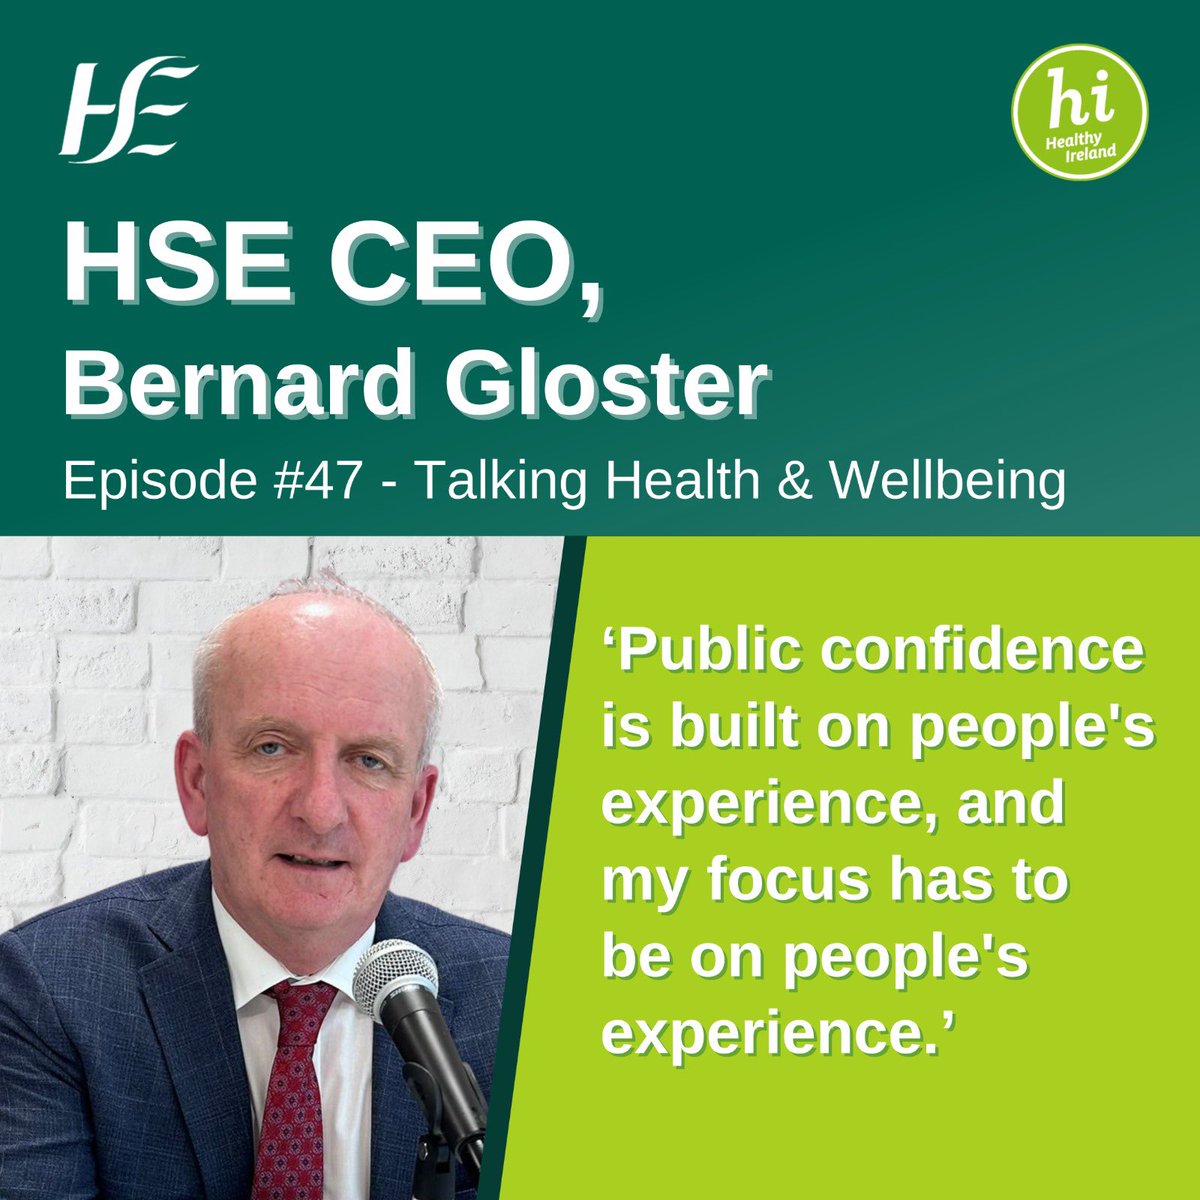 We are producing our #podcast series for a year now & really please to sit down with HSE CEO @BernardGloster last week to hear his thoughts on #HealthyIreland in the HSE, his 1st year in the job & much more: bit.ly/3v0wjrc 
#talkinghealthandwellbeing #TobaccoFreeIreland